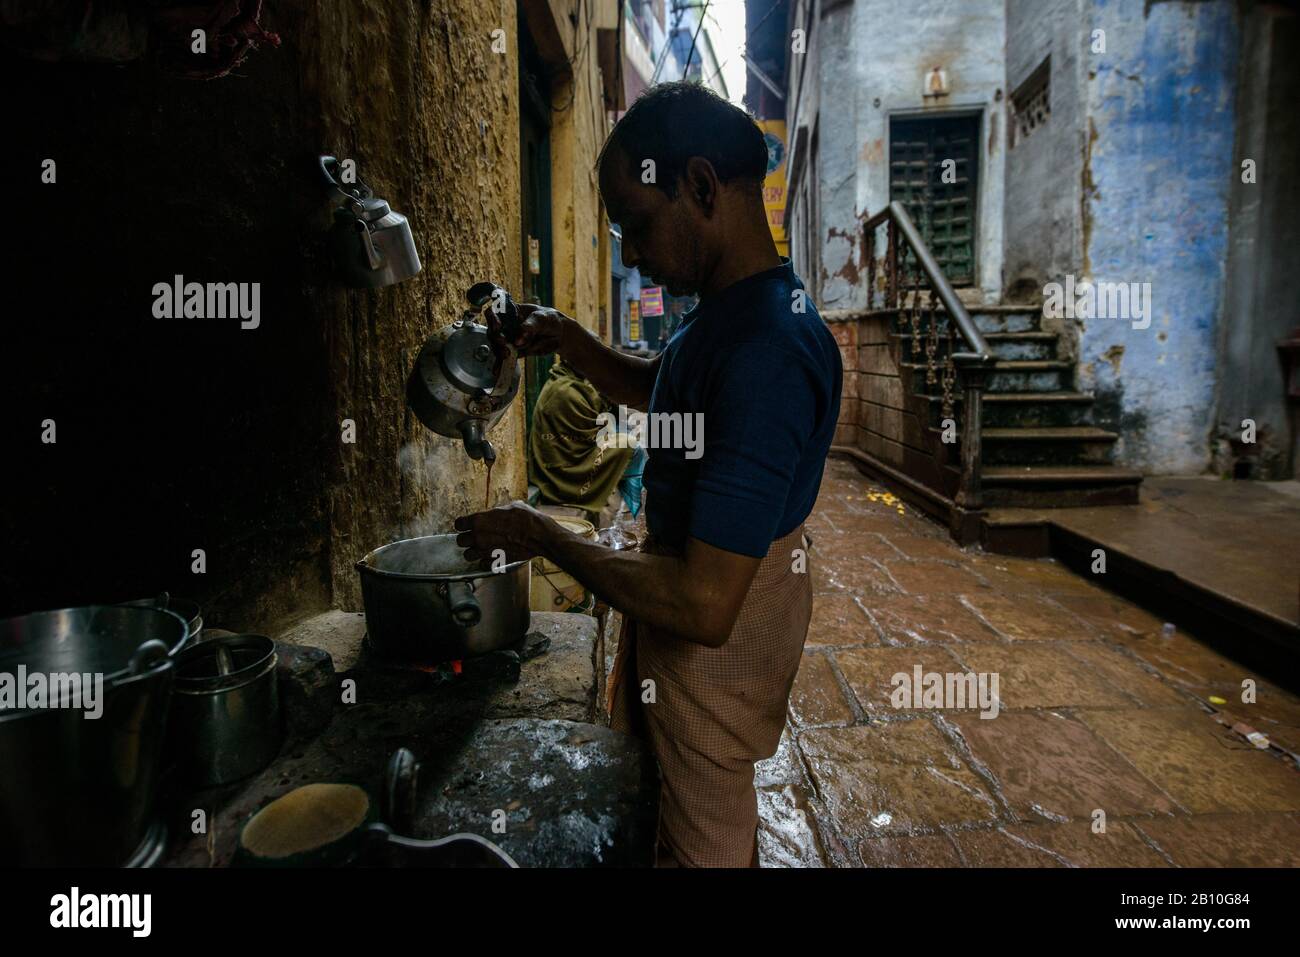 Chai manufacturer in the streets of the old city of Varanasi, India Stock Photo